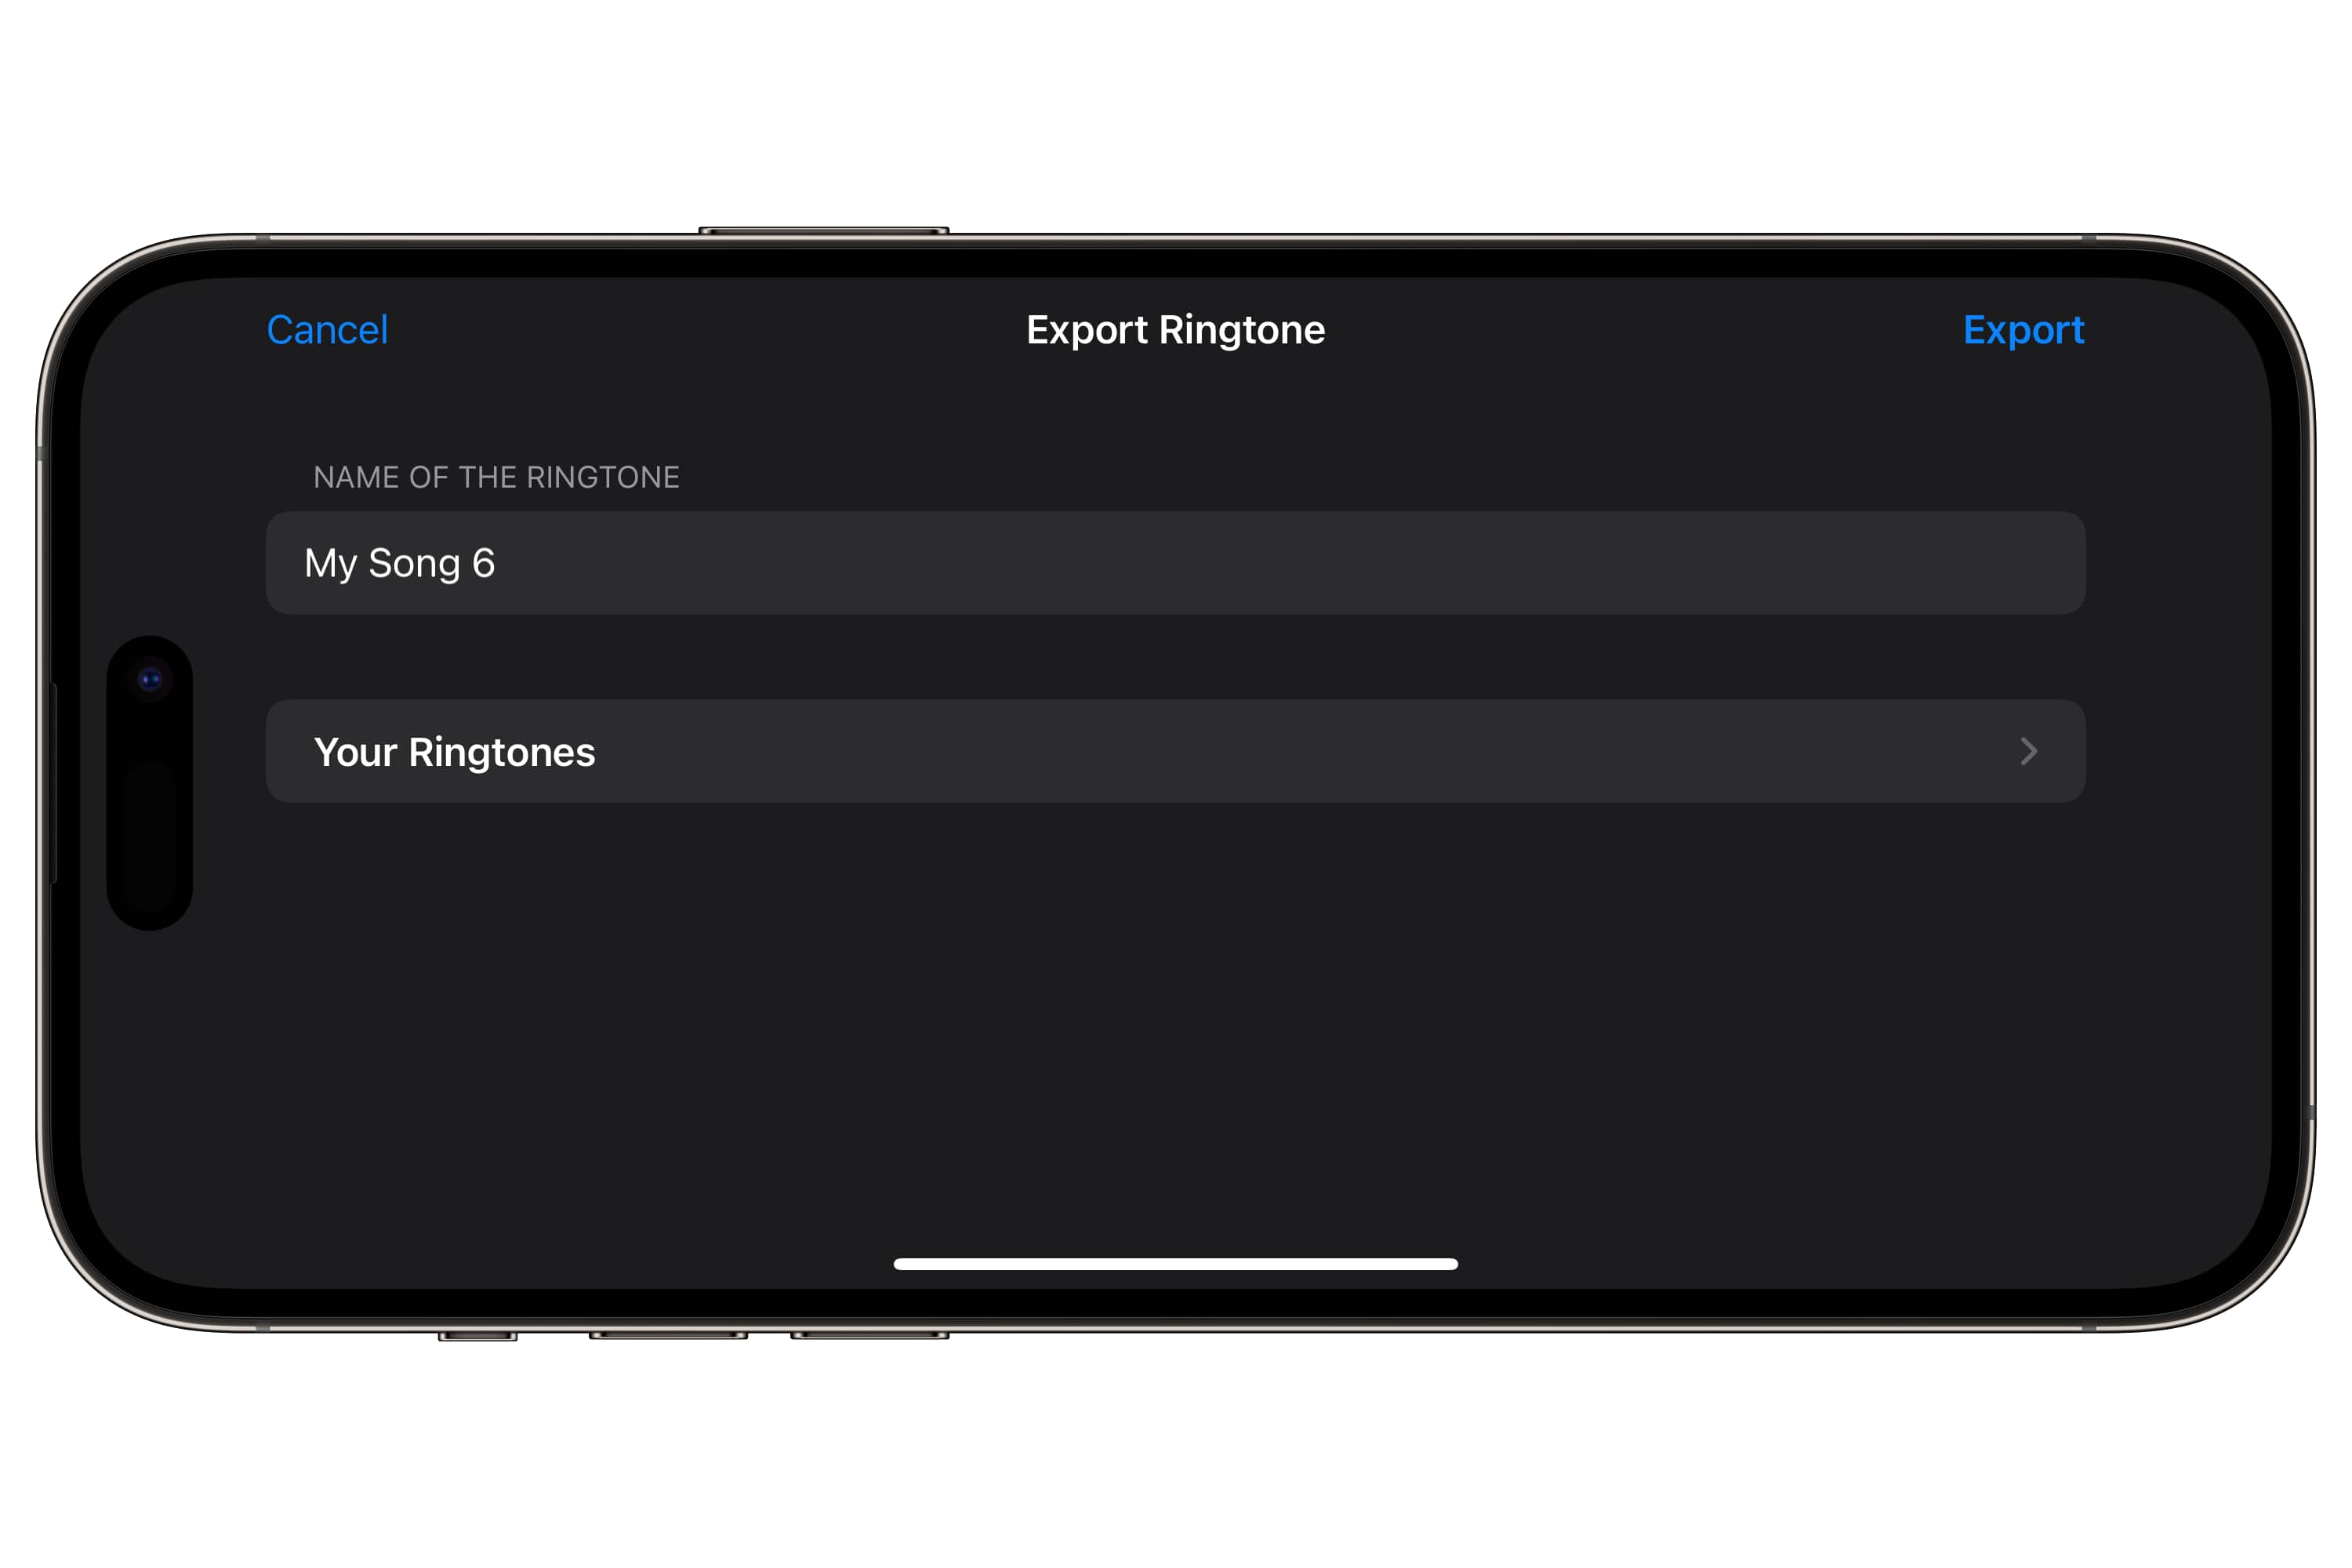 Exporting a ringtone from GarageBand on an iPhone.